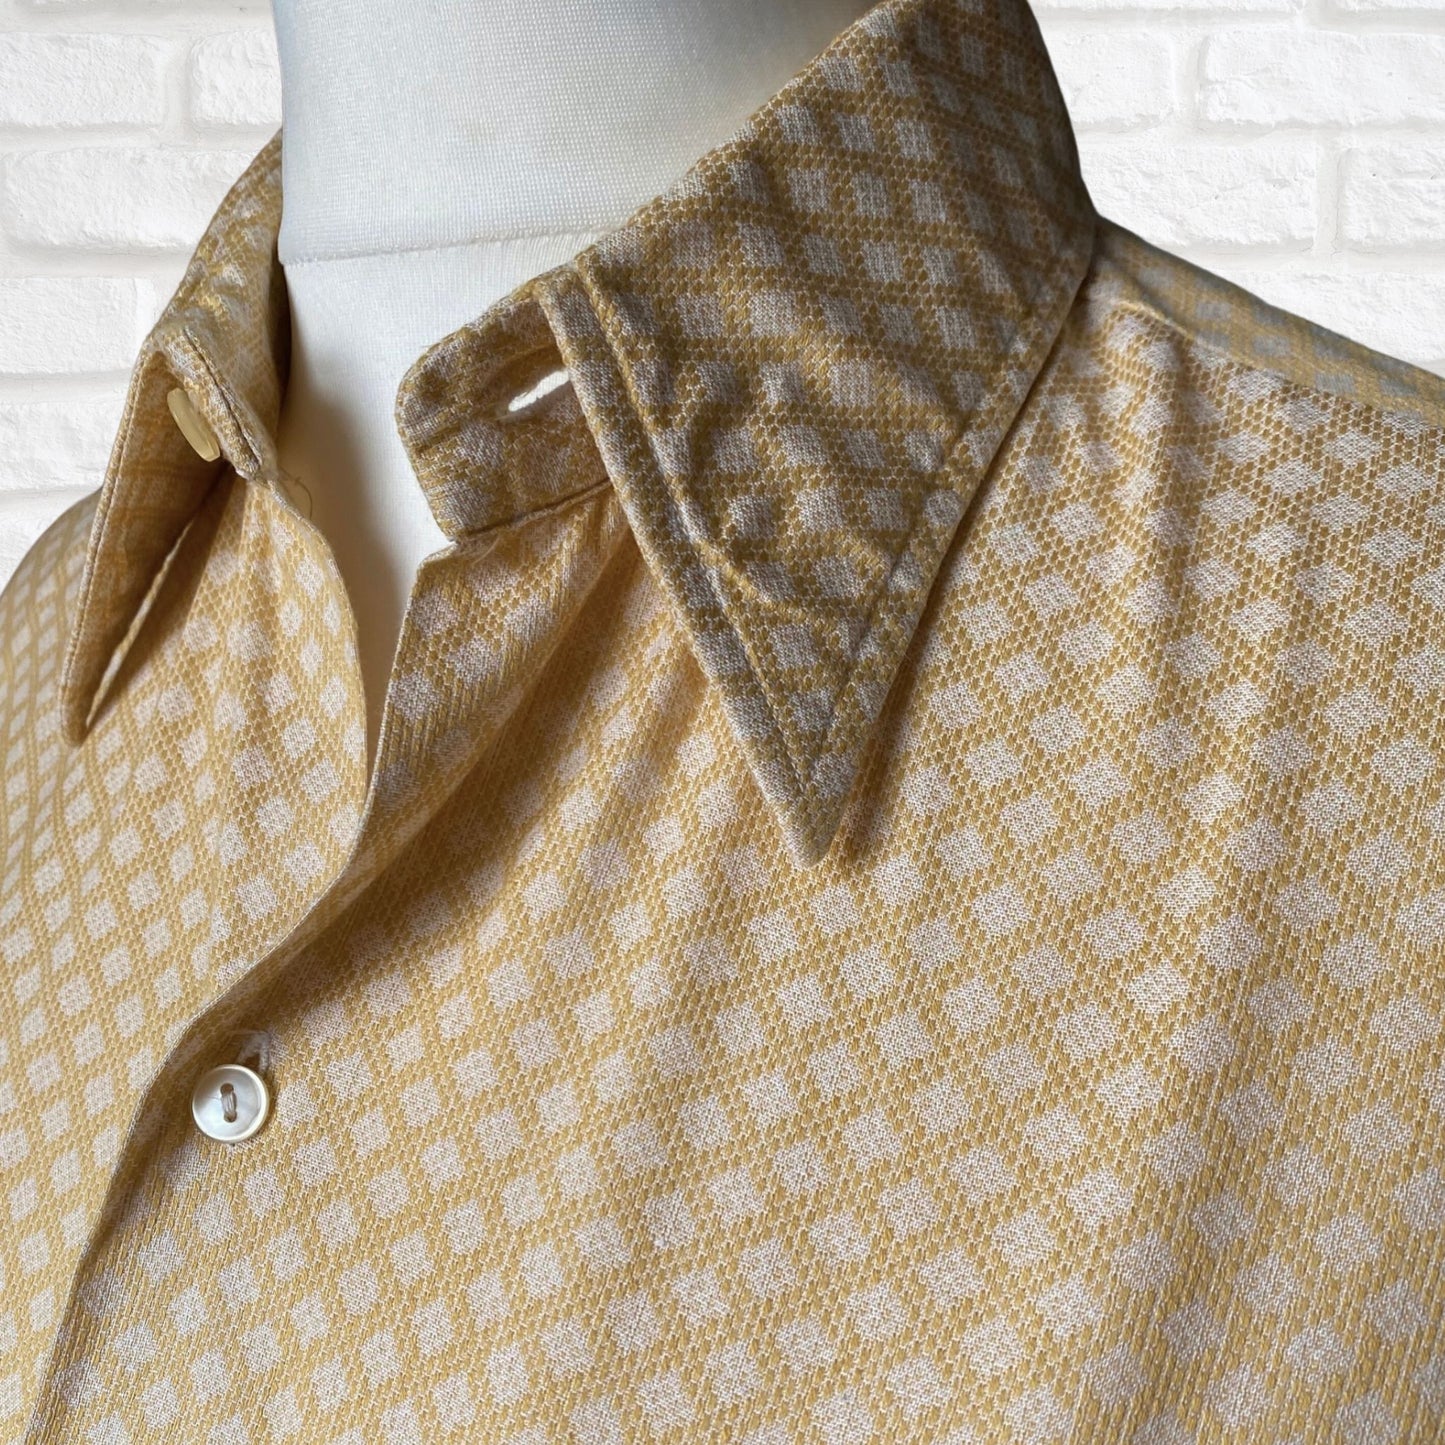 70s Vintage Yellow and White Geometric Print Shirt with Dagger Collar - Classic Retro Style for Casual Weekend Wear. Approx UK size M to L (men) 16-18 (women)